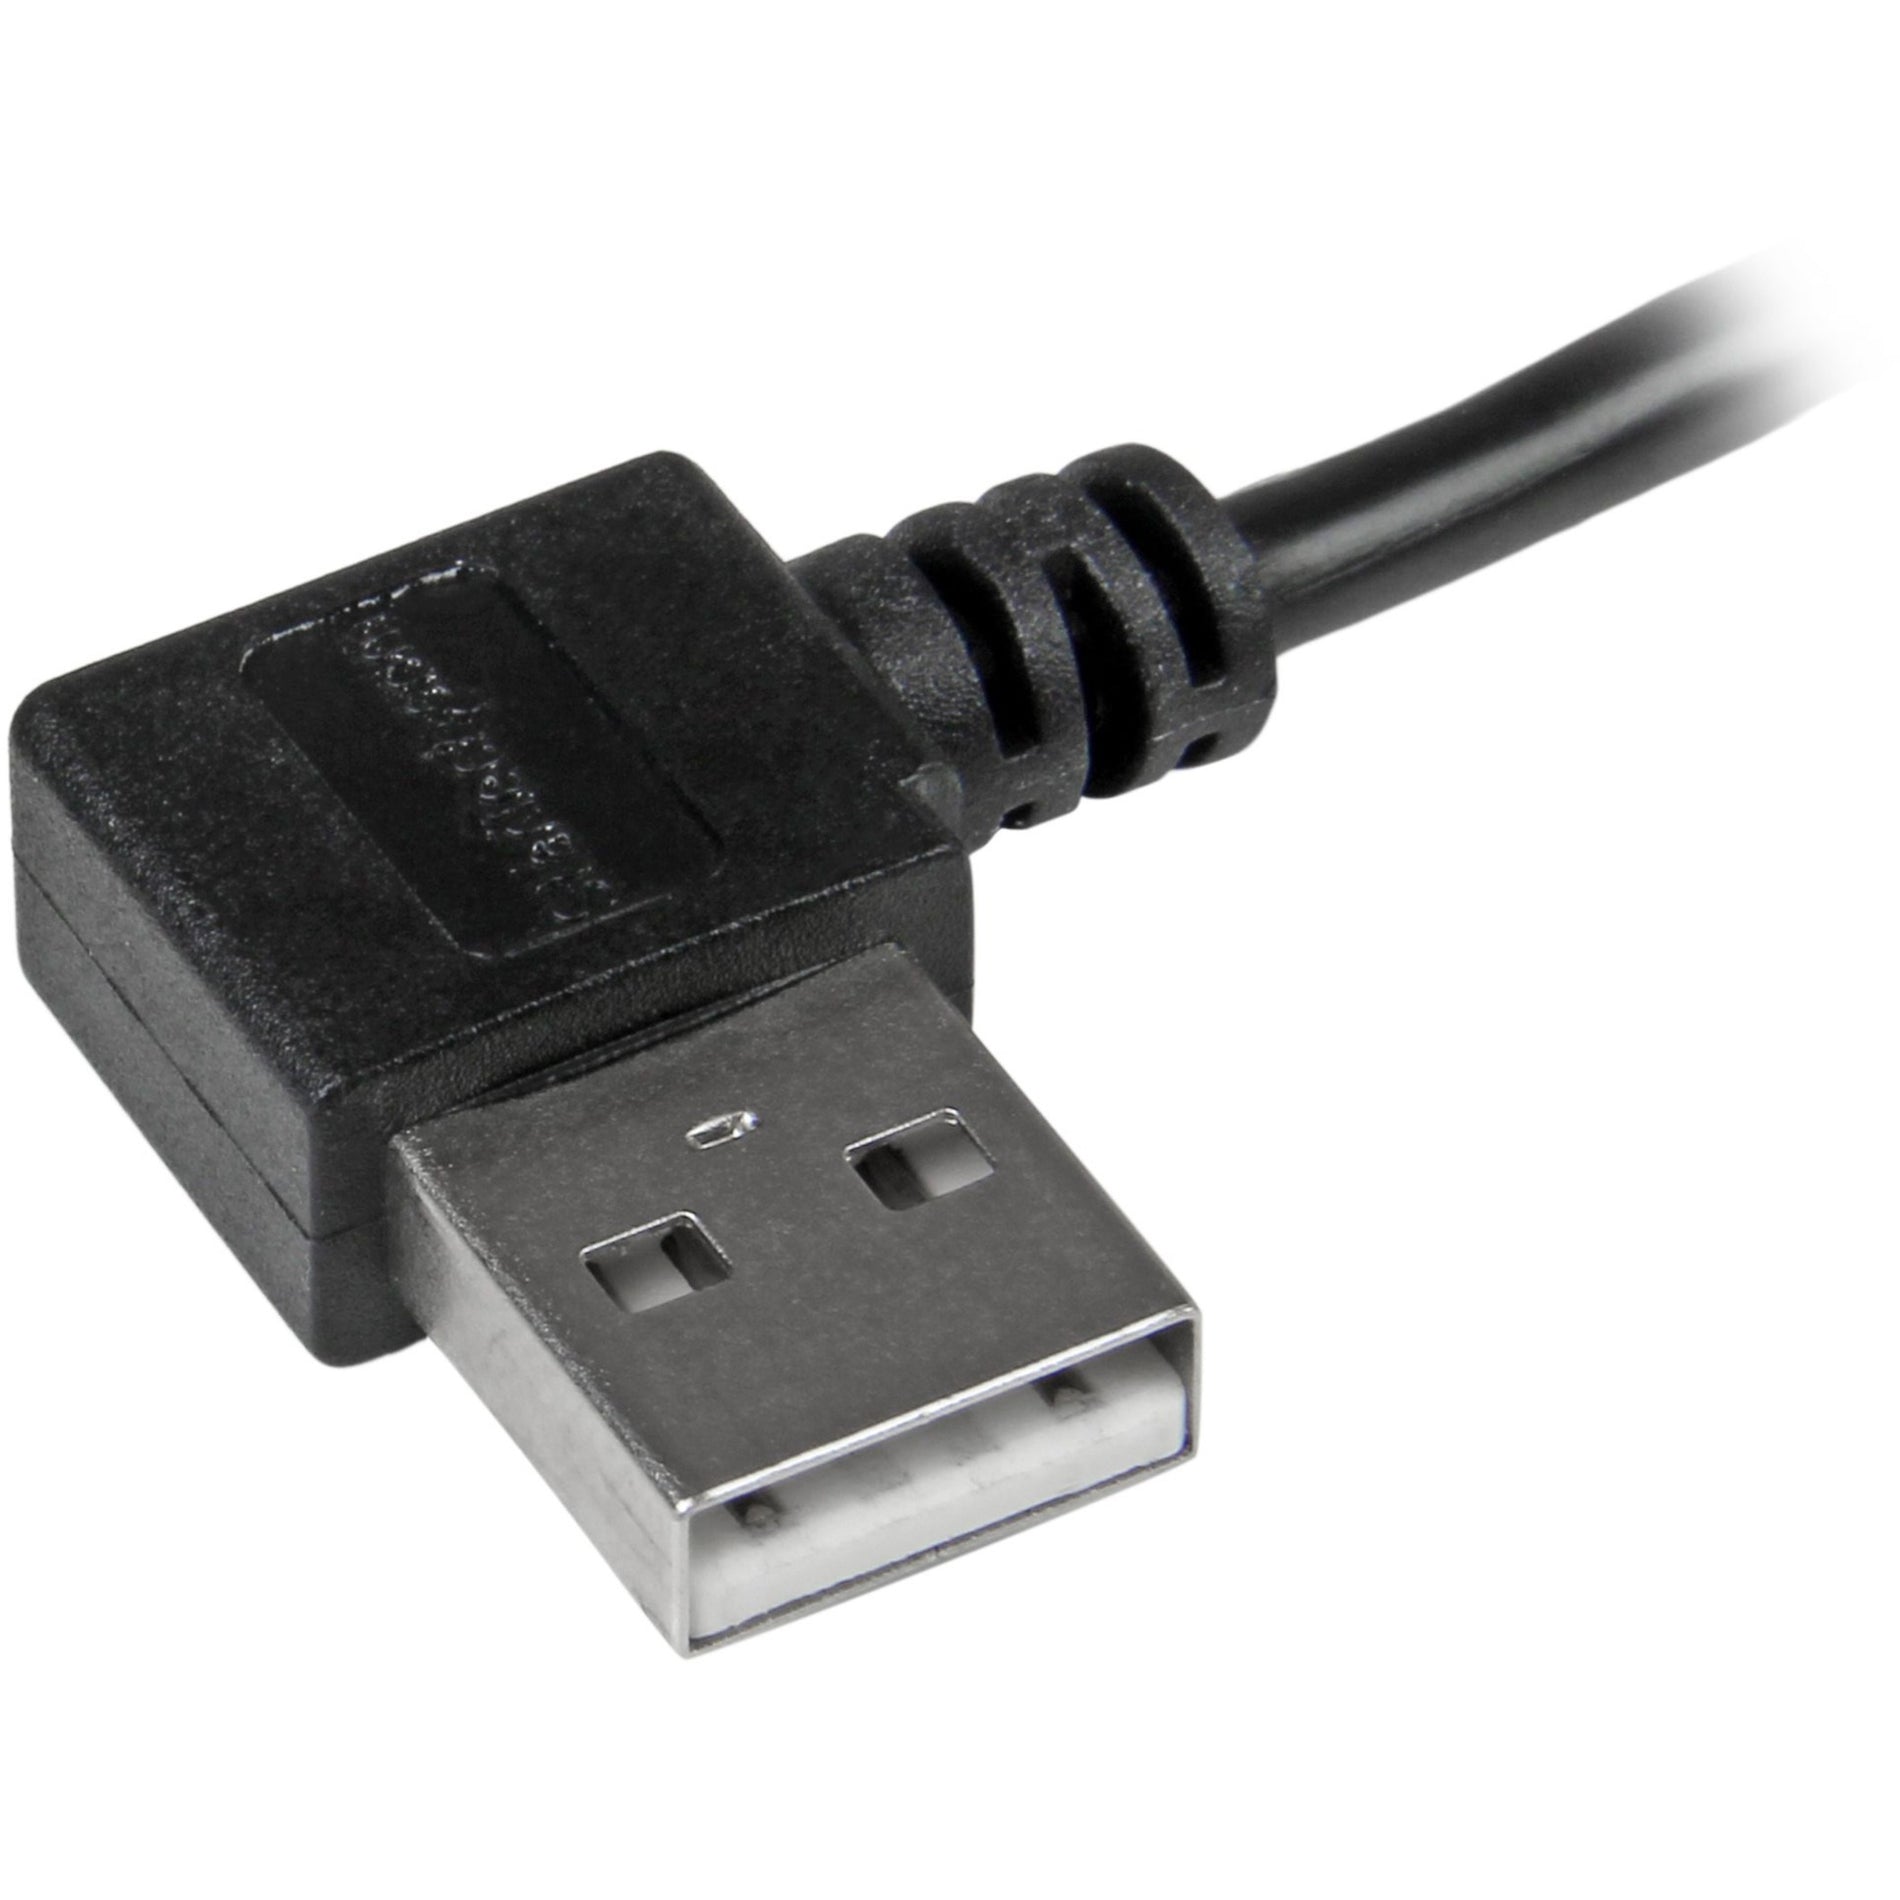 StarTech.com USB2AUB2RA1M Micro-USB Cable with Right-Angled Connectors - M/M - 1m (3ft), Fast Data Transfer, Black